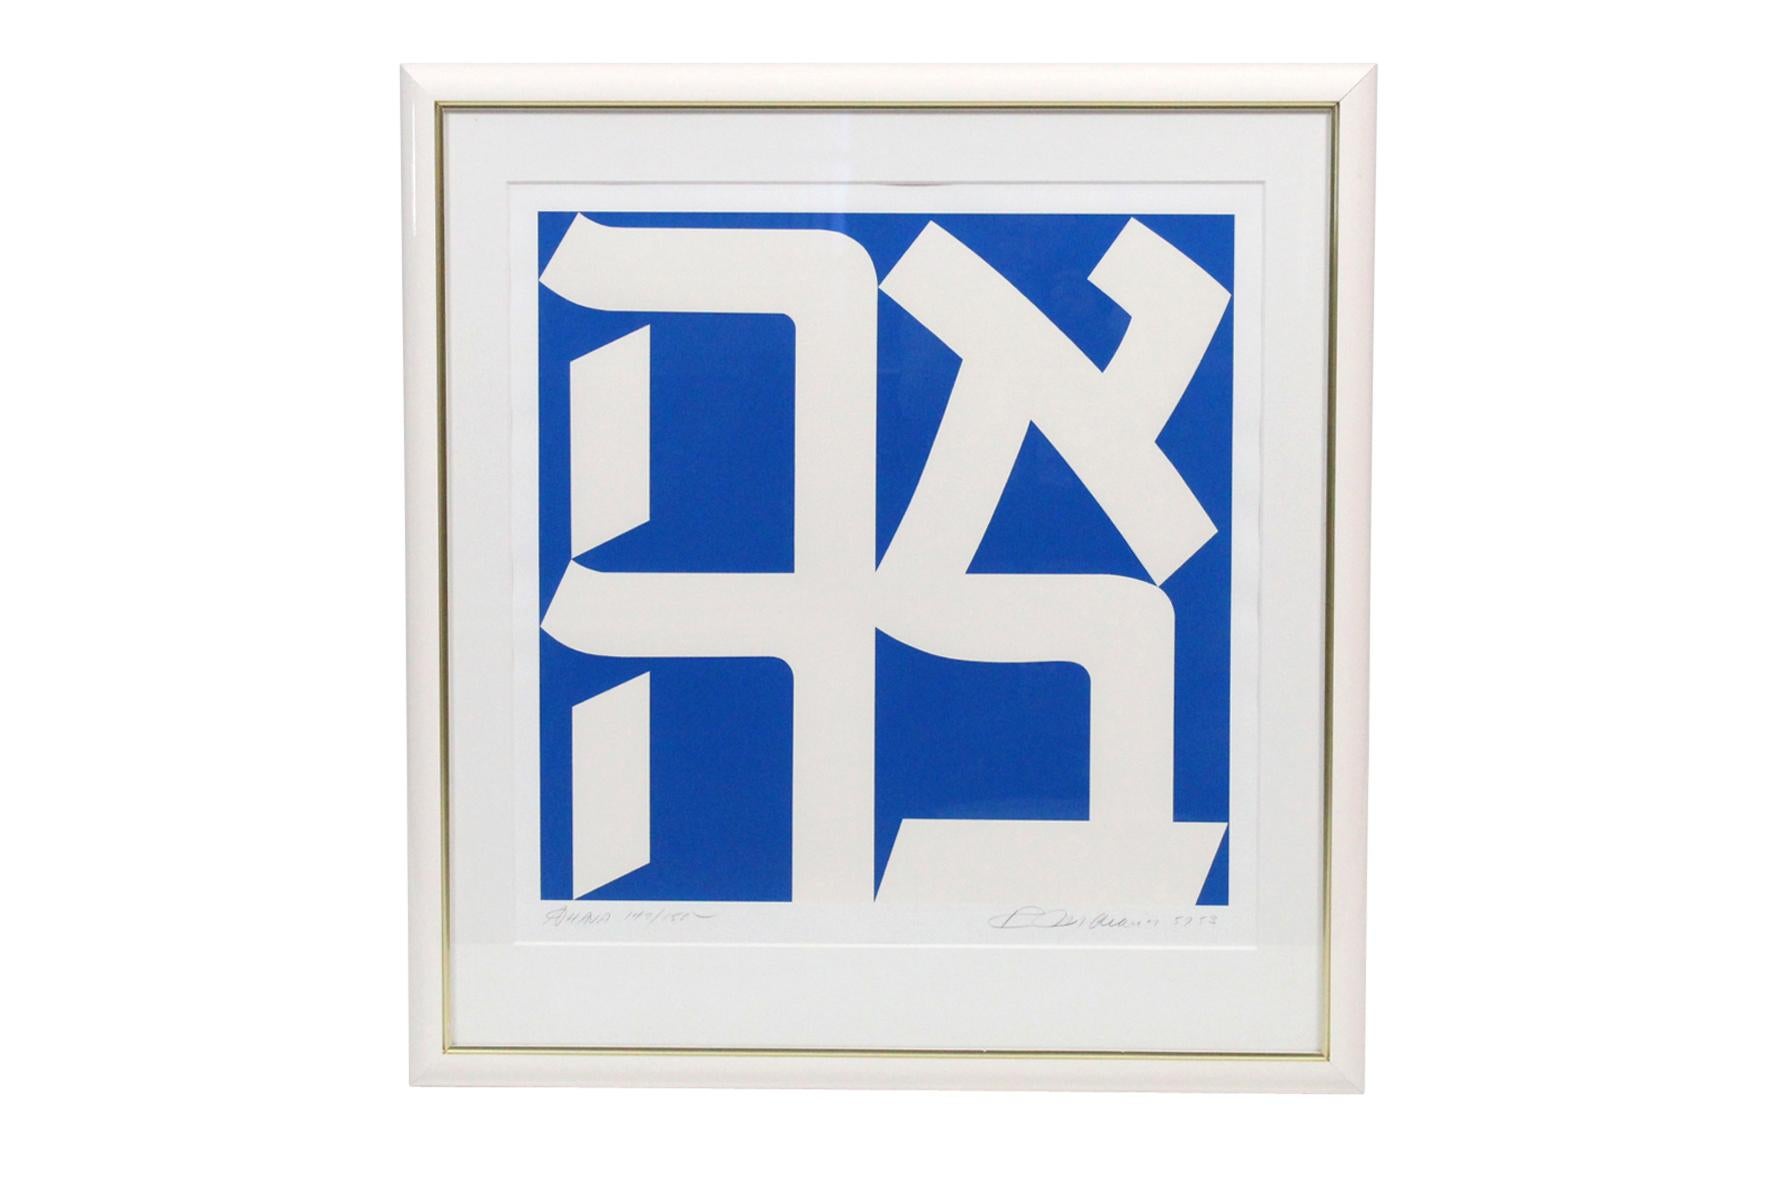 A variation of Robert Indiana's iconic LOVE design, his bold and graphic print 